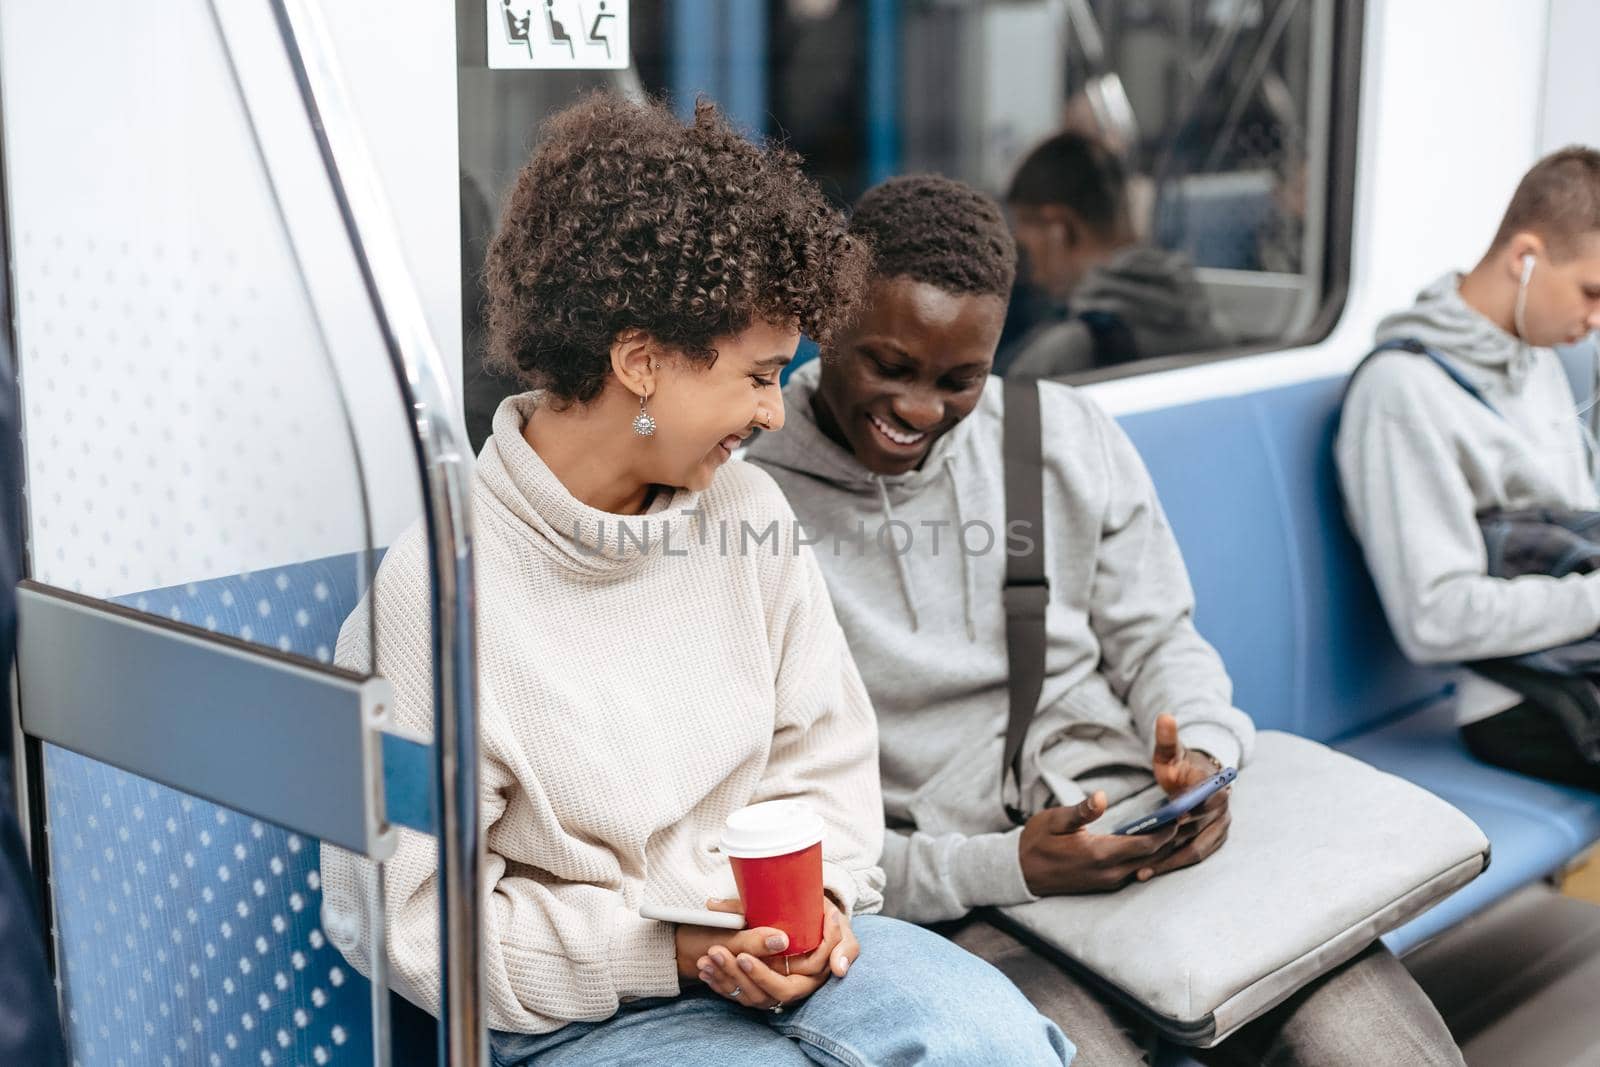 young couple using a smartphone while sitting in a subway car . close-up.